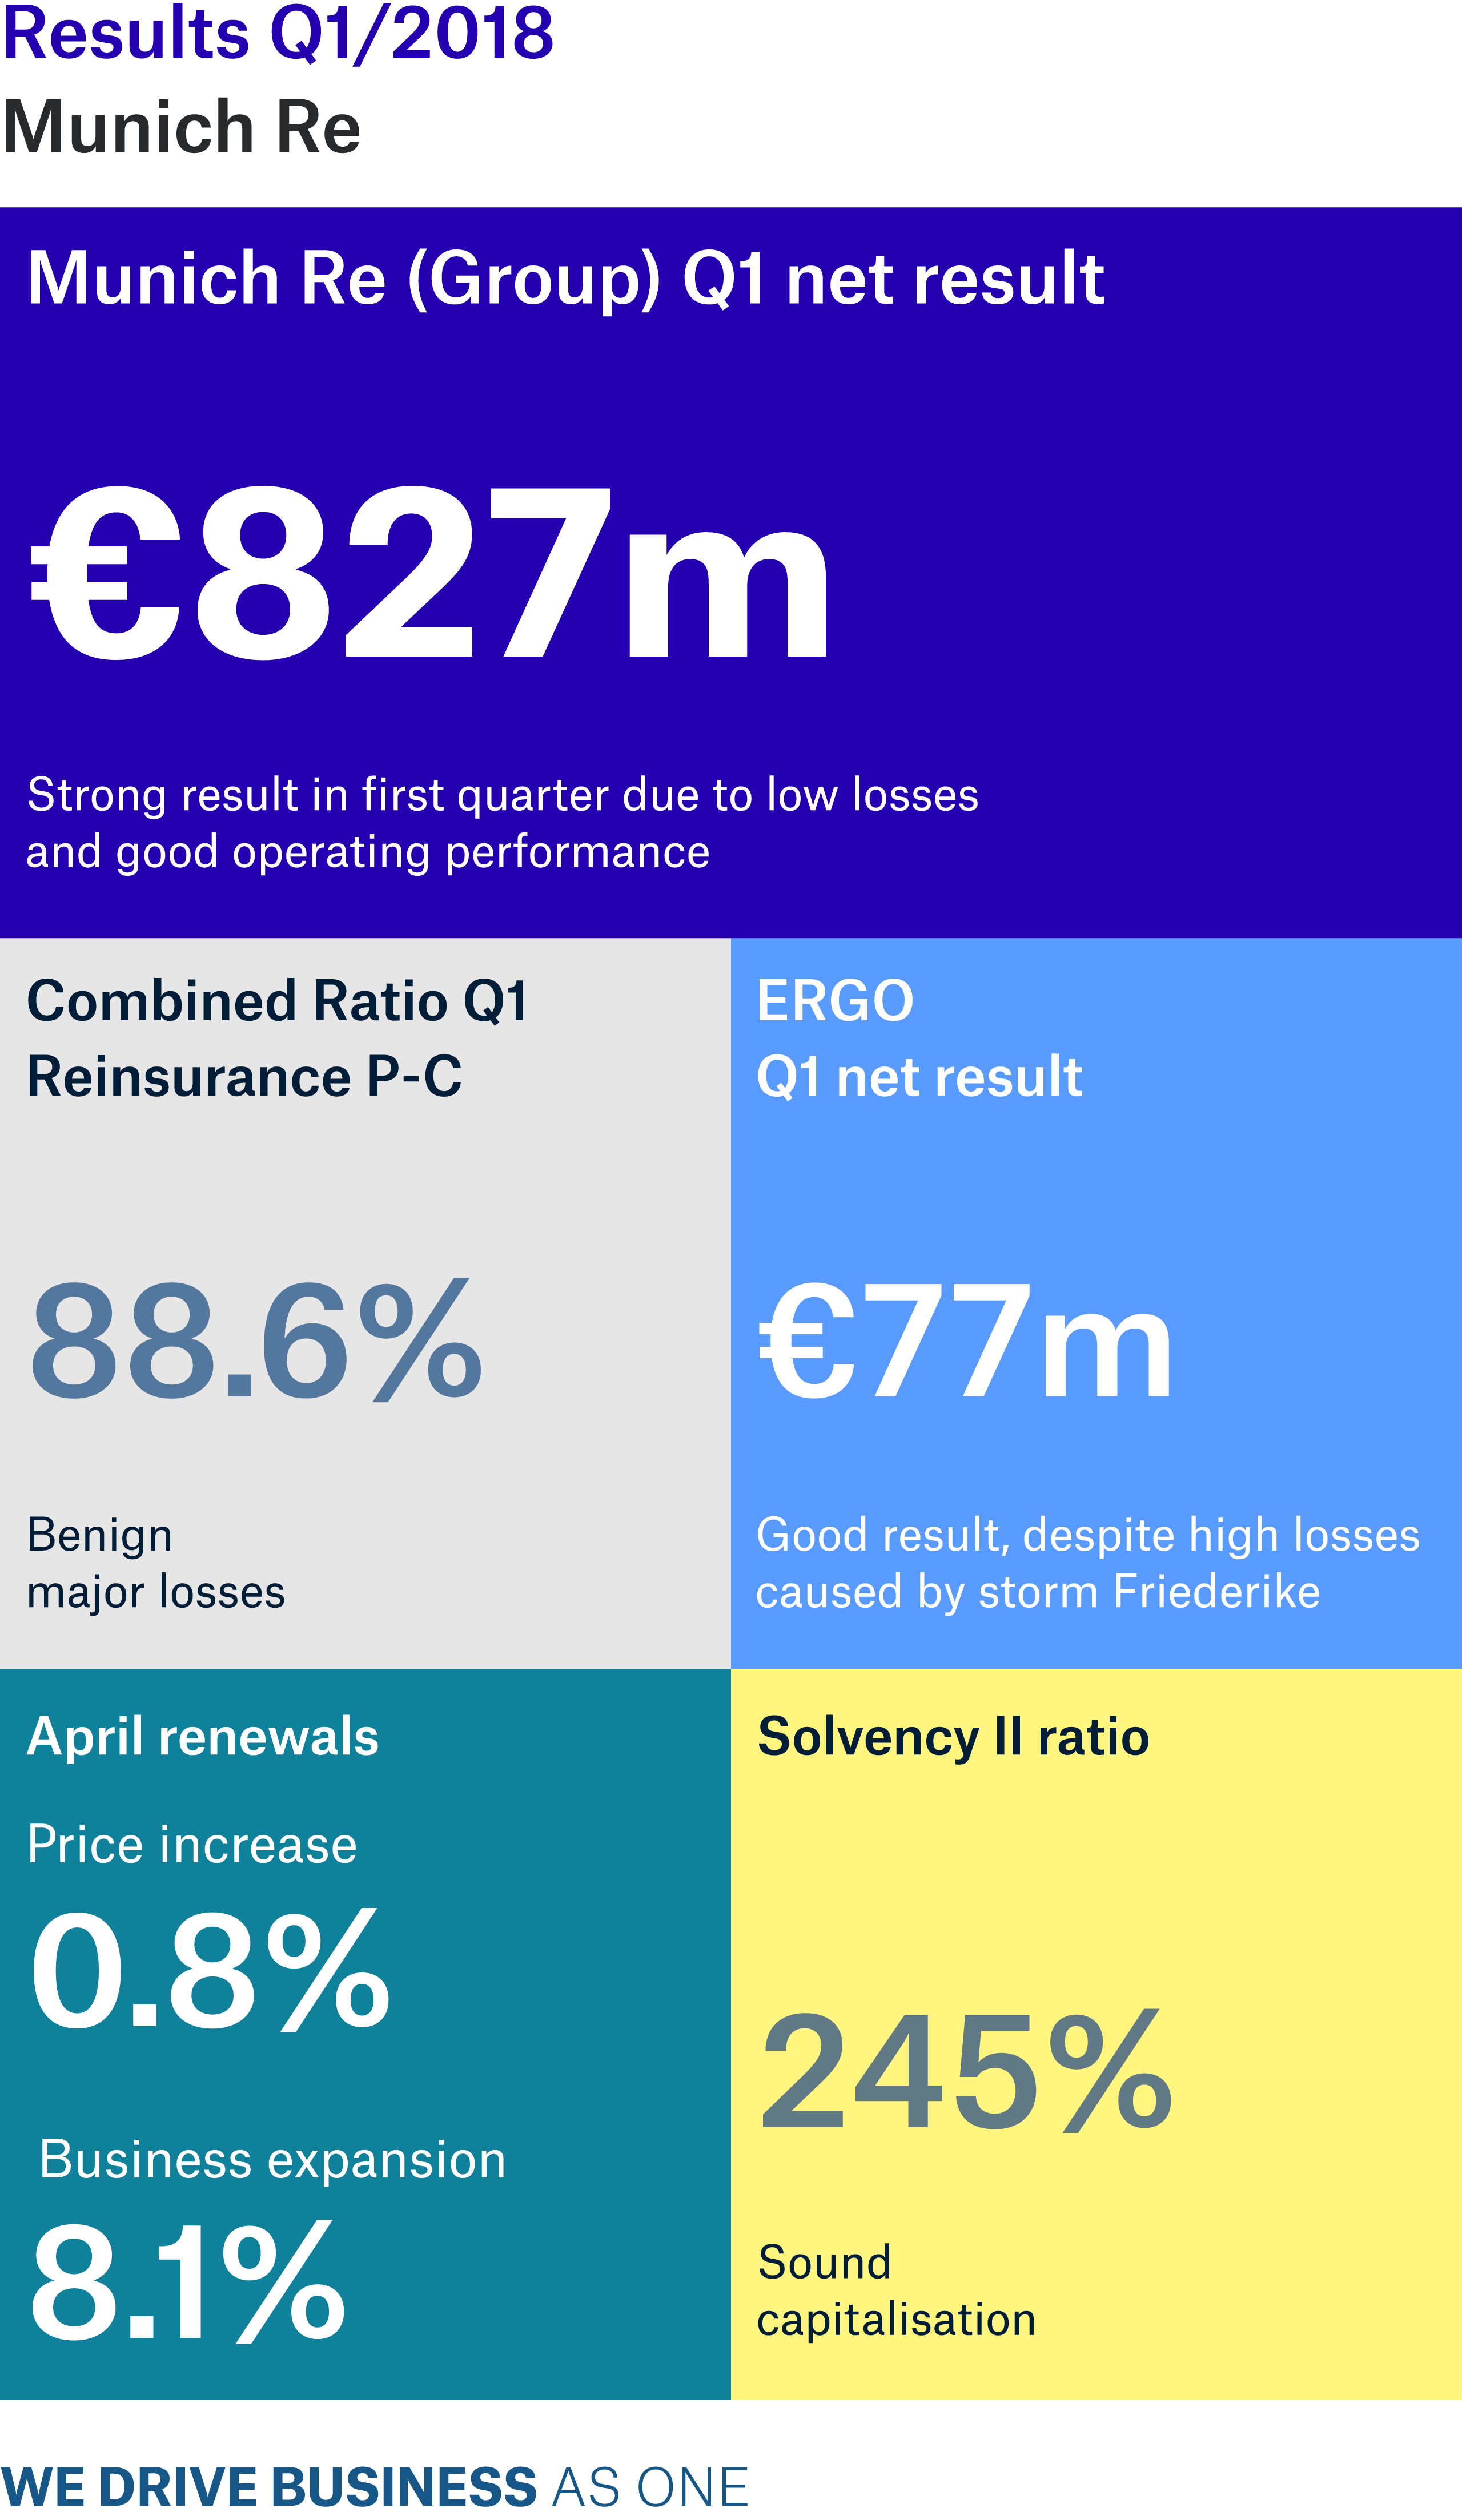 Year on year, the operating result increased to €1,283m (952m).